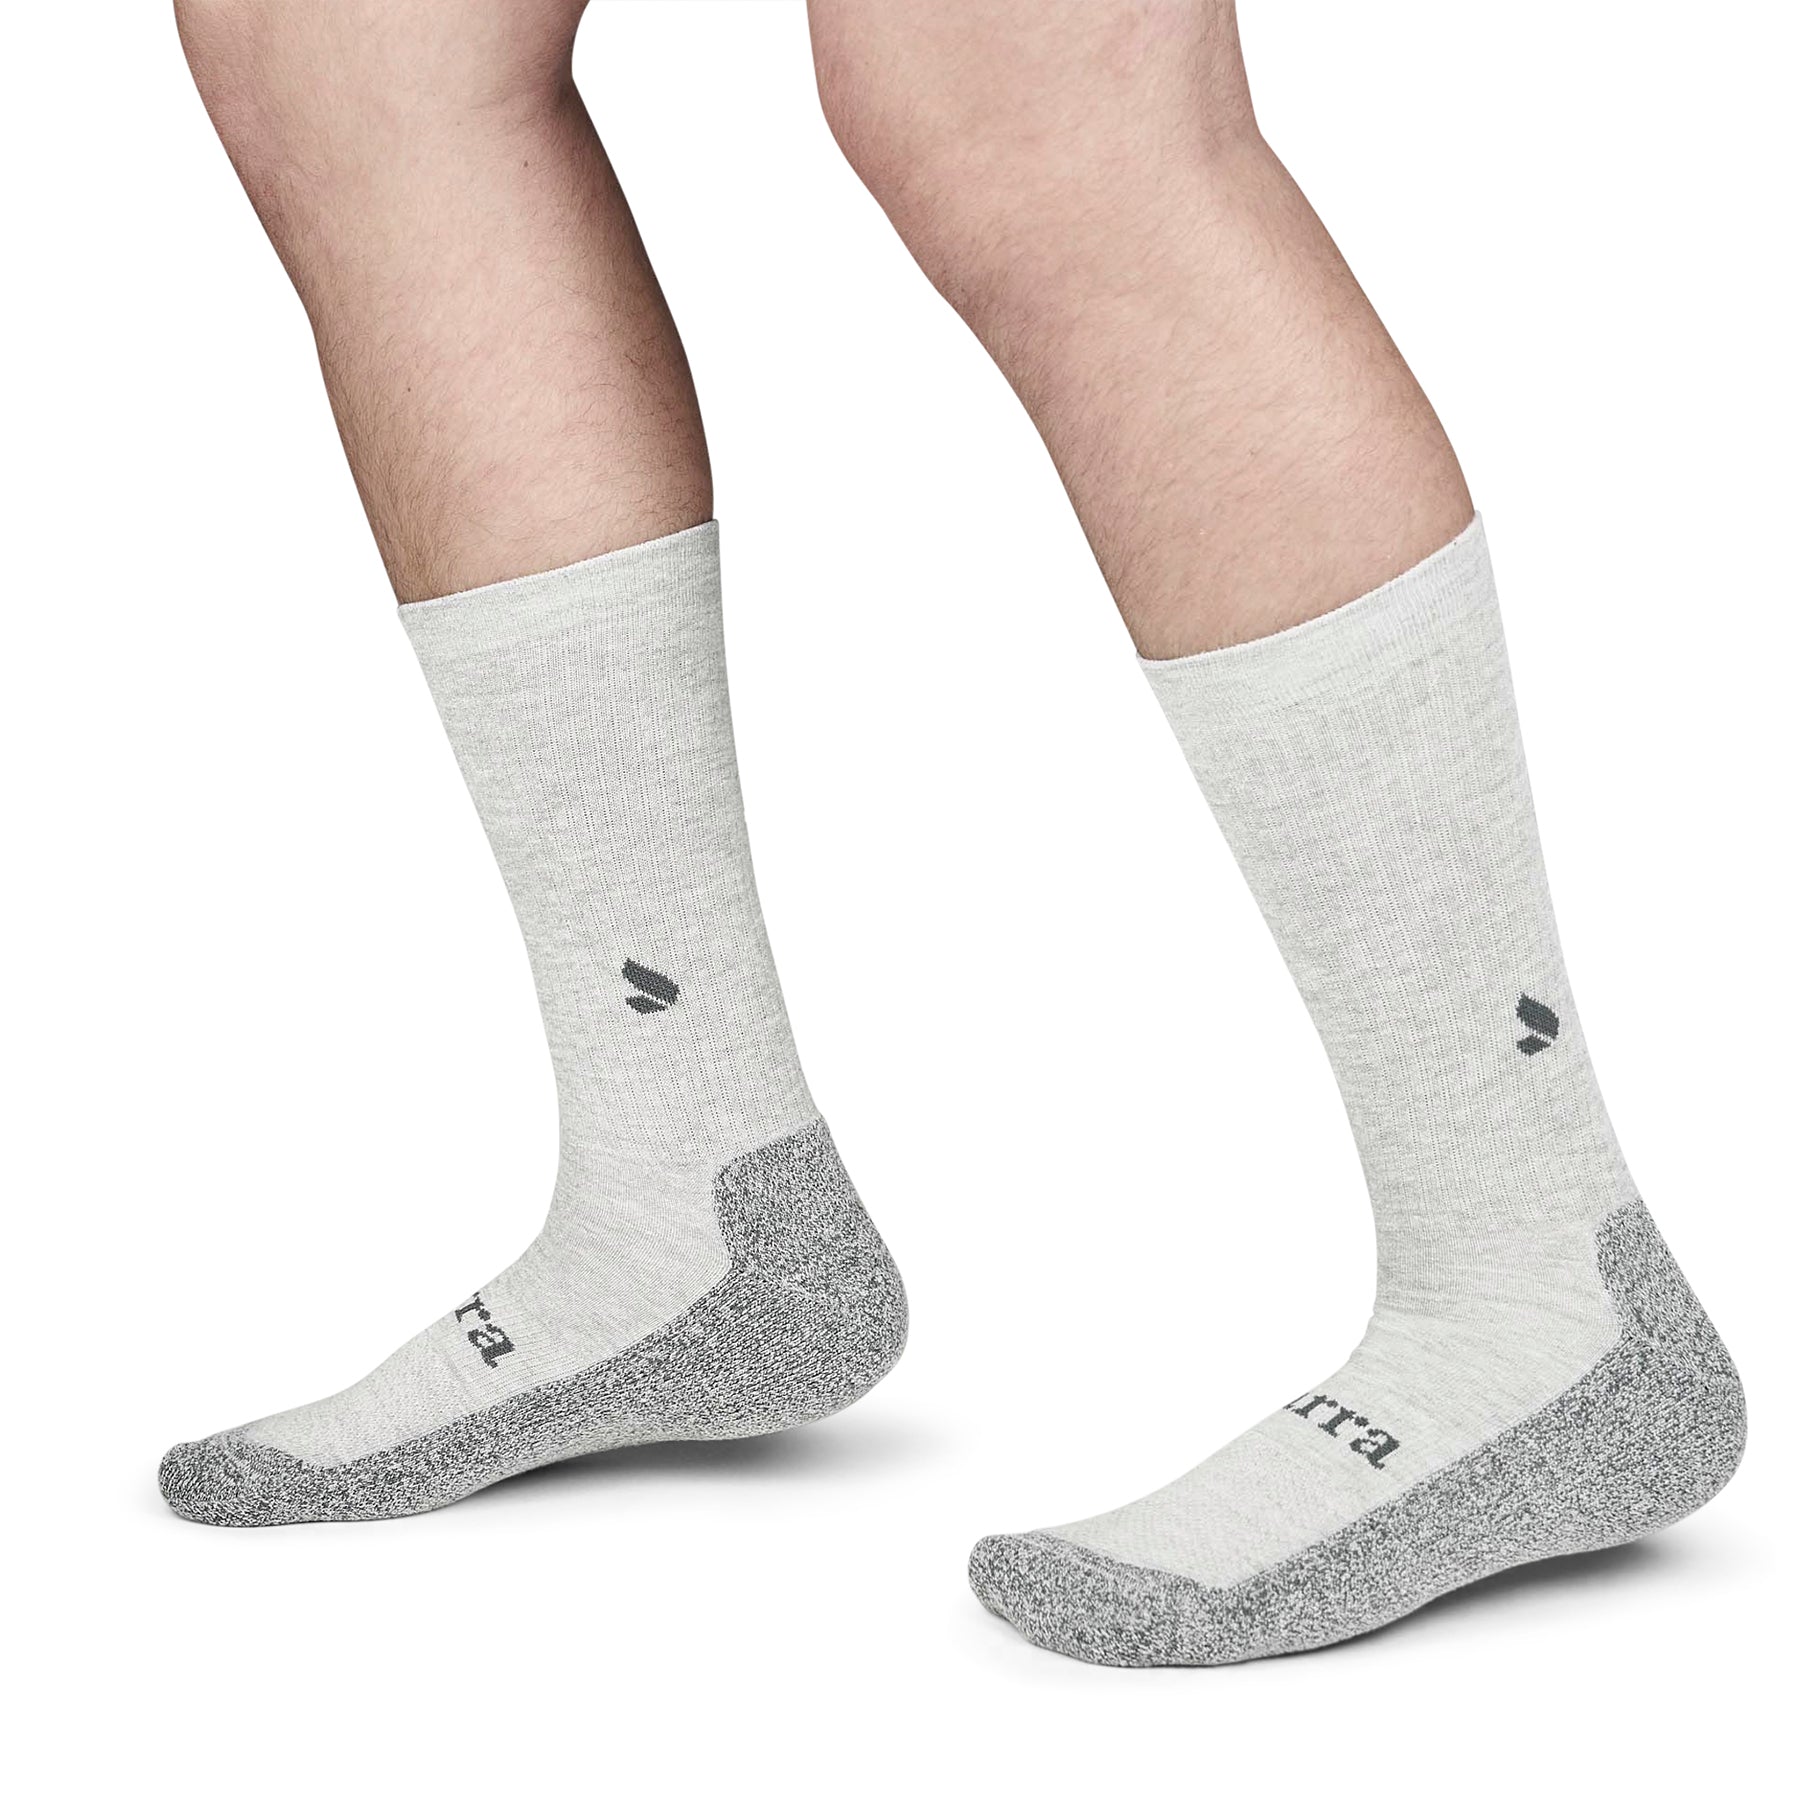 Loose Fit White Over The Calf Socks to EEEEE - 3Pack